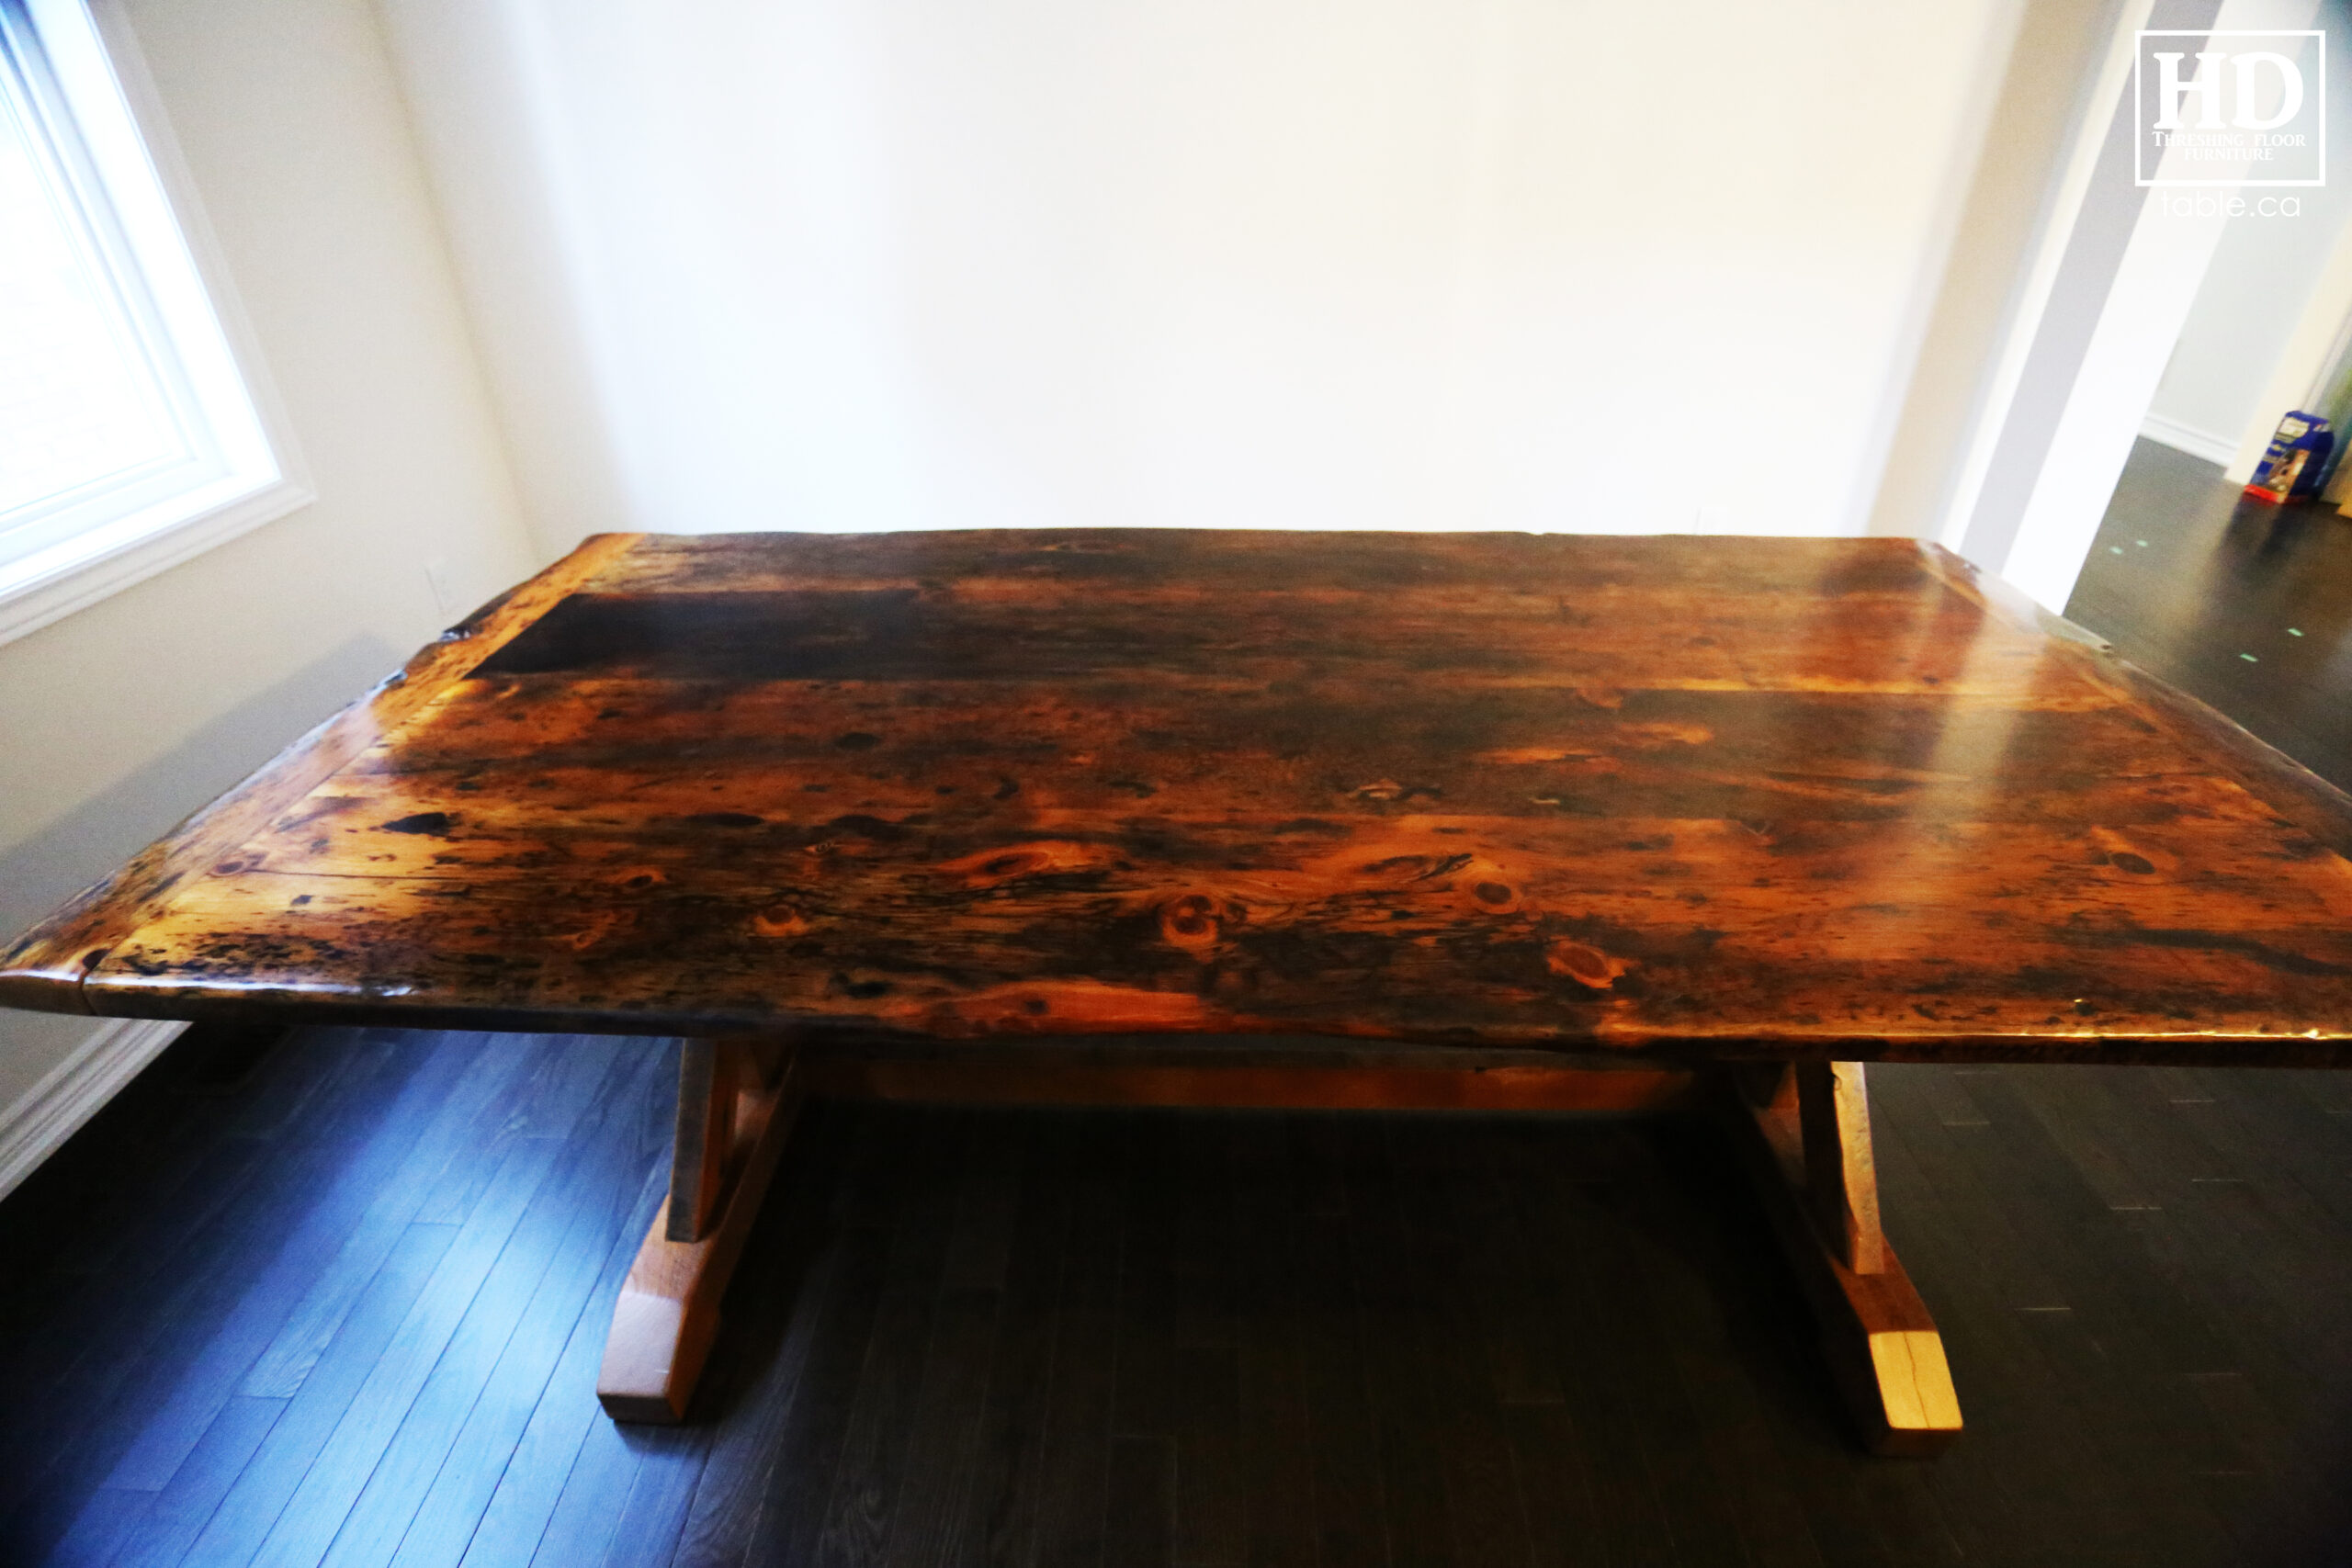 Epoxy Finished Table by HD Threshing Floor Furniture / www.table.ca